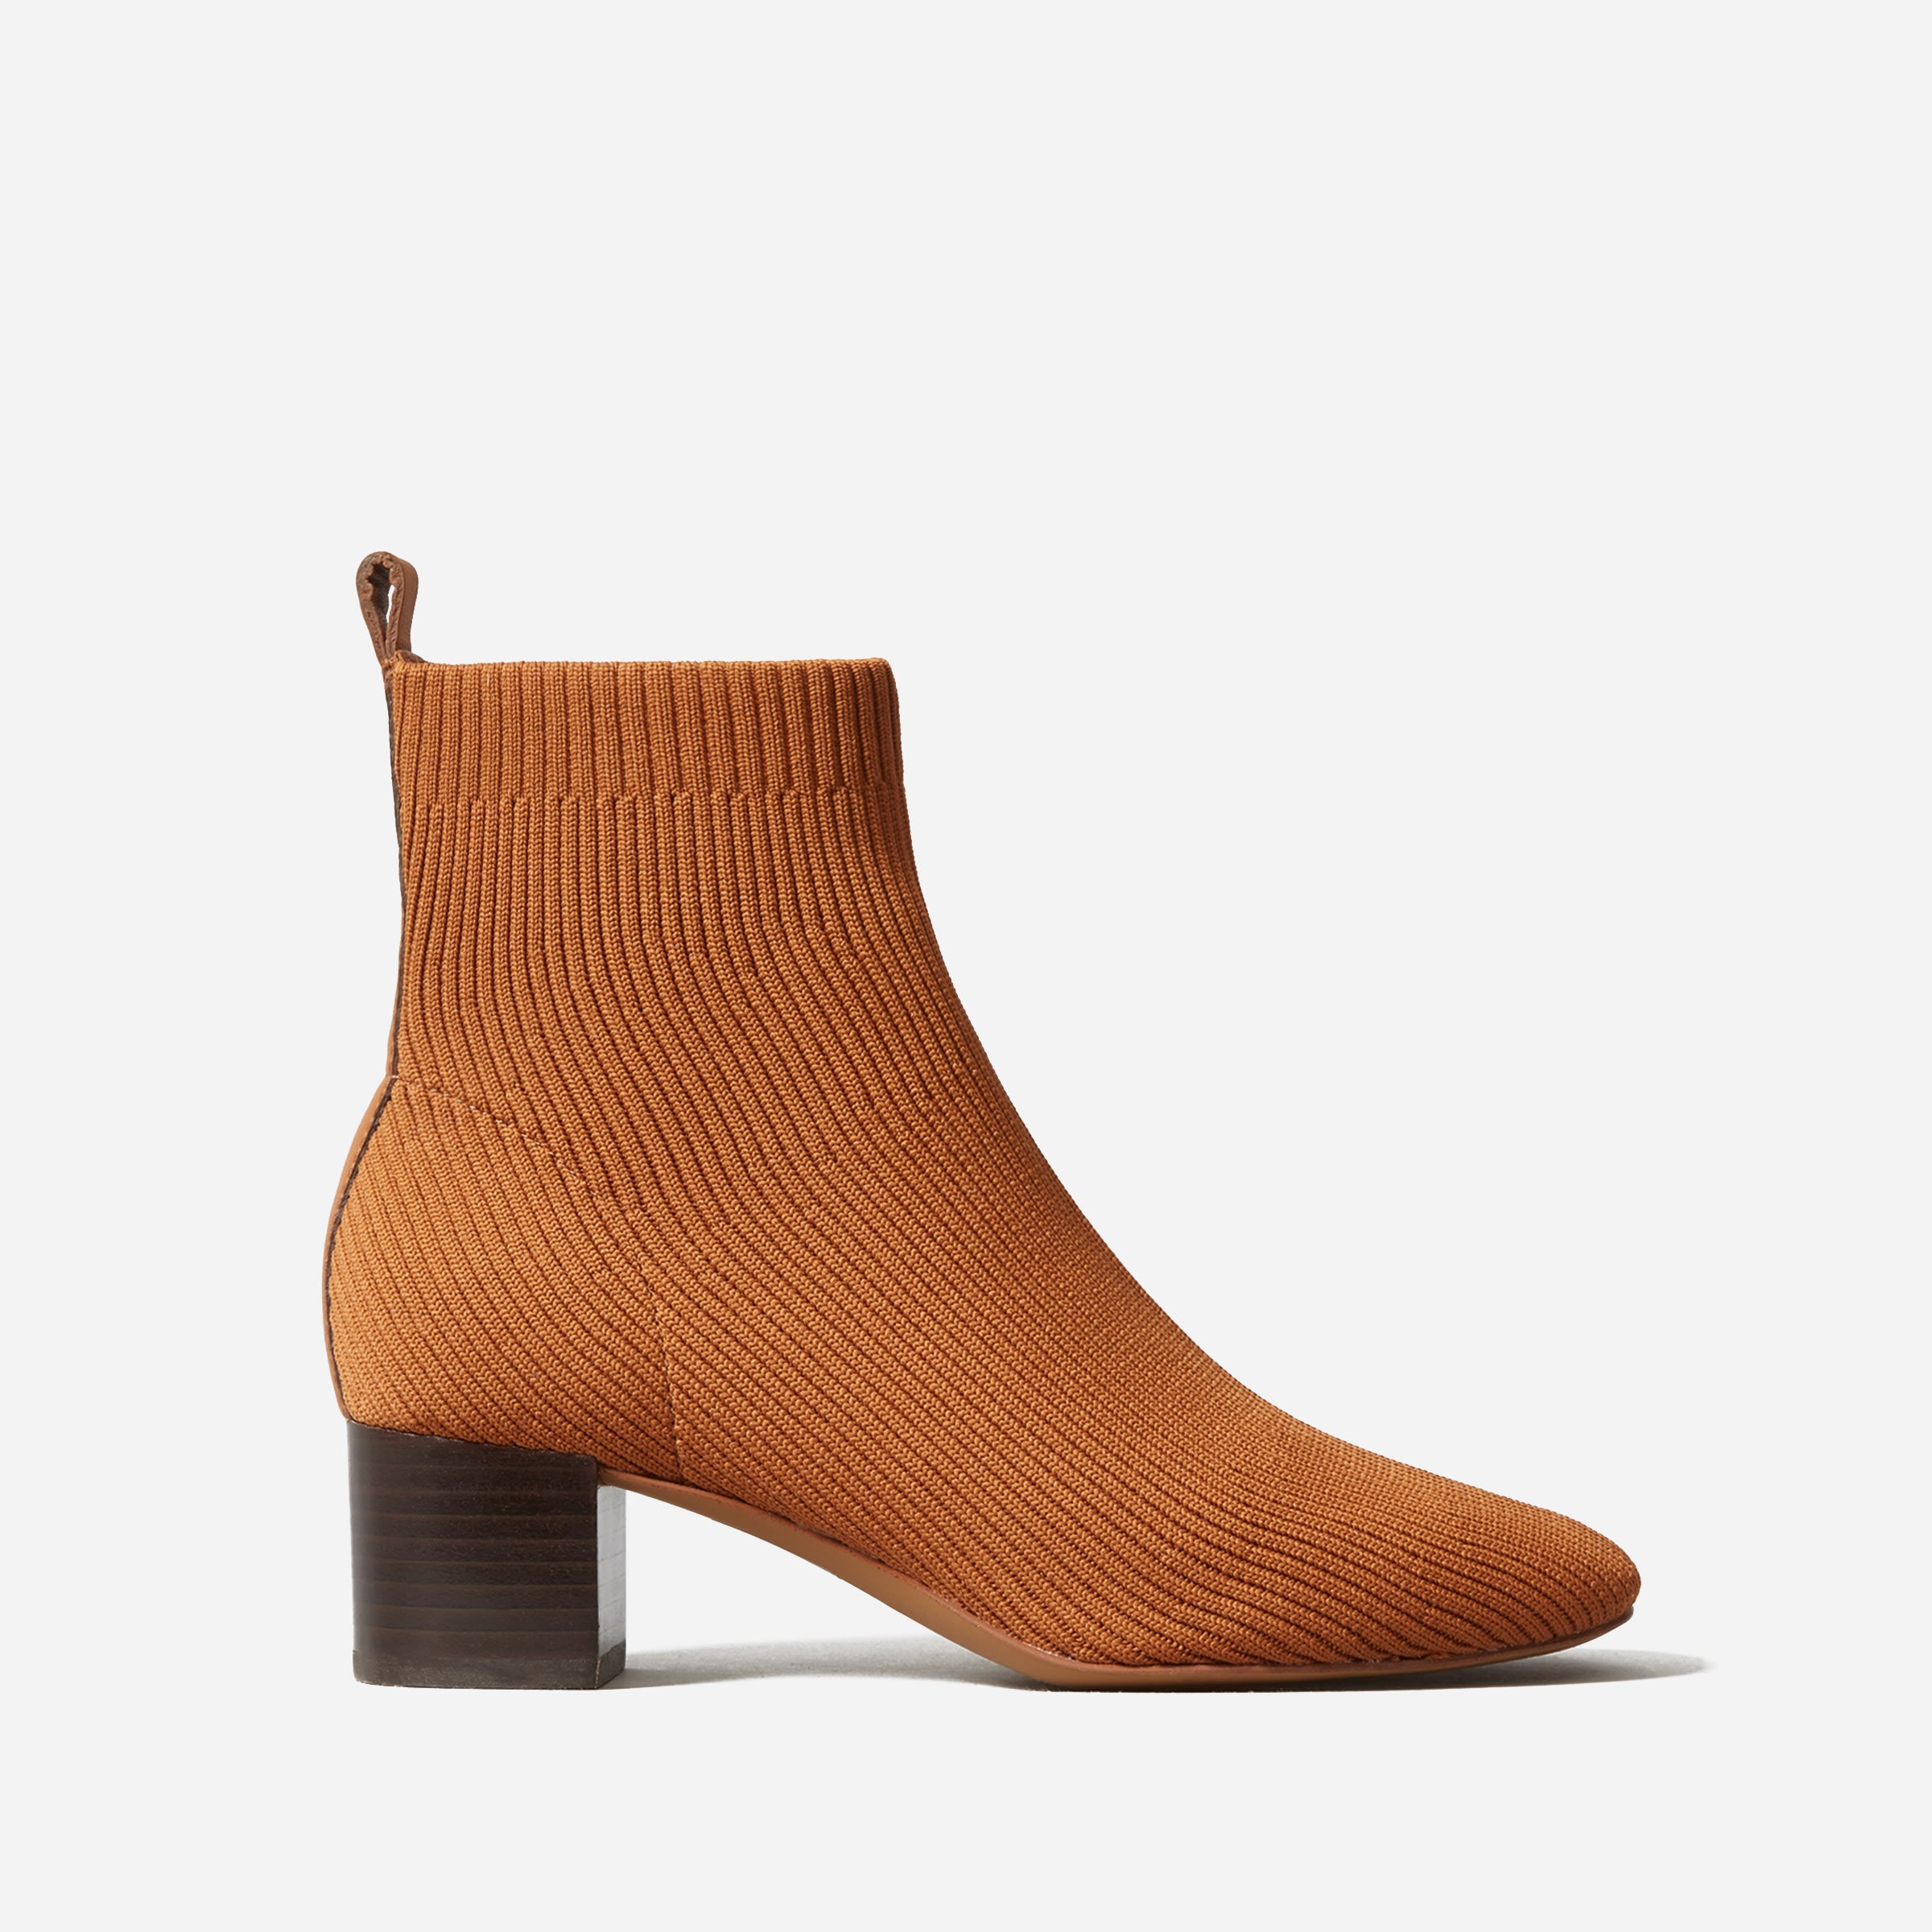 What I Screenshot This Week: The Glove Boots I'm Working Into My Budget